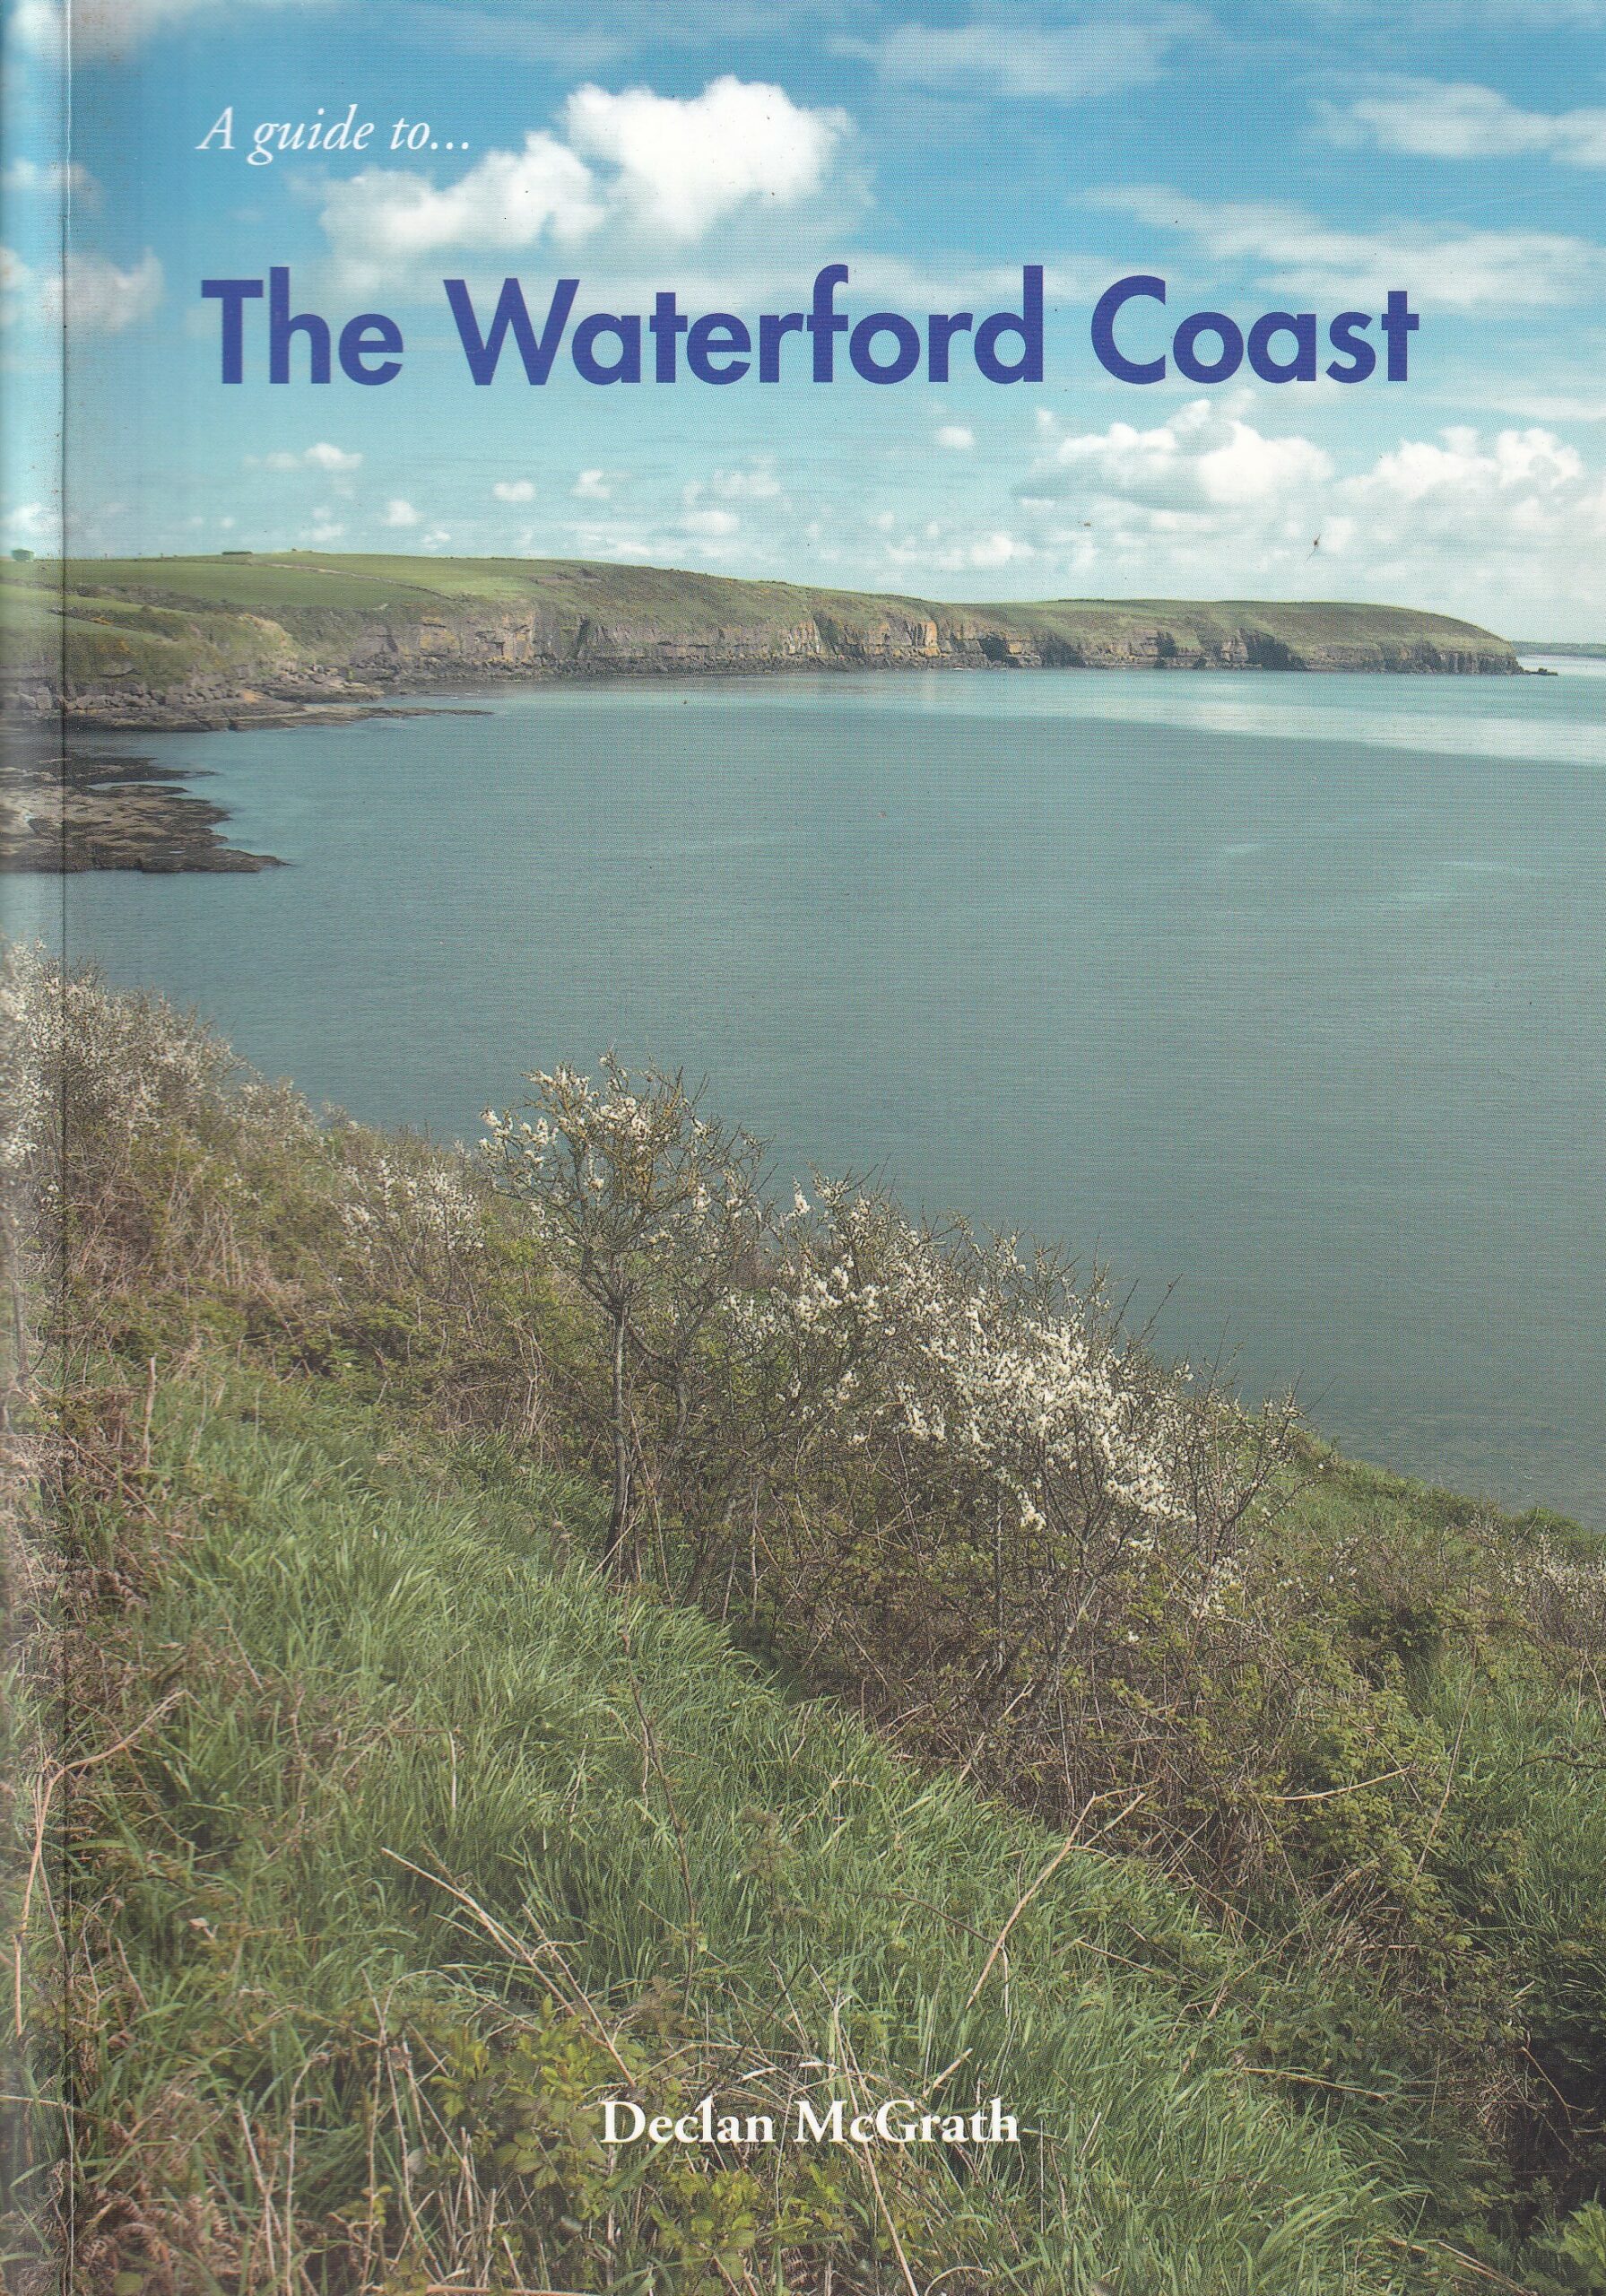 A Guide to the Waterford Coast by Declan Mcgrath